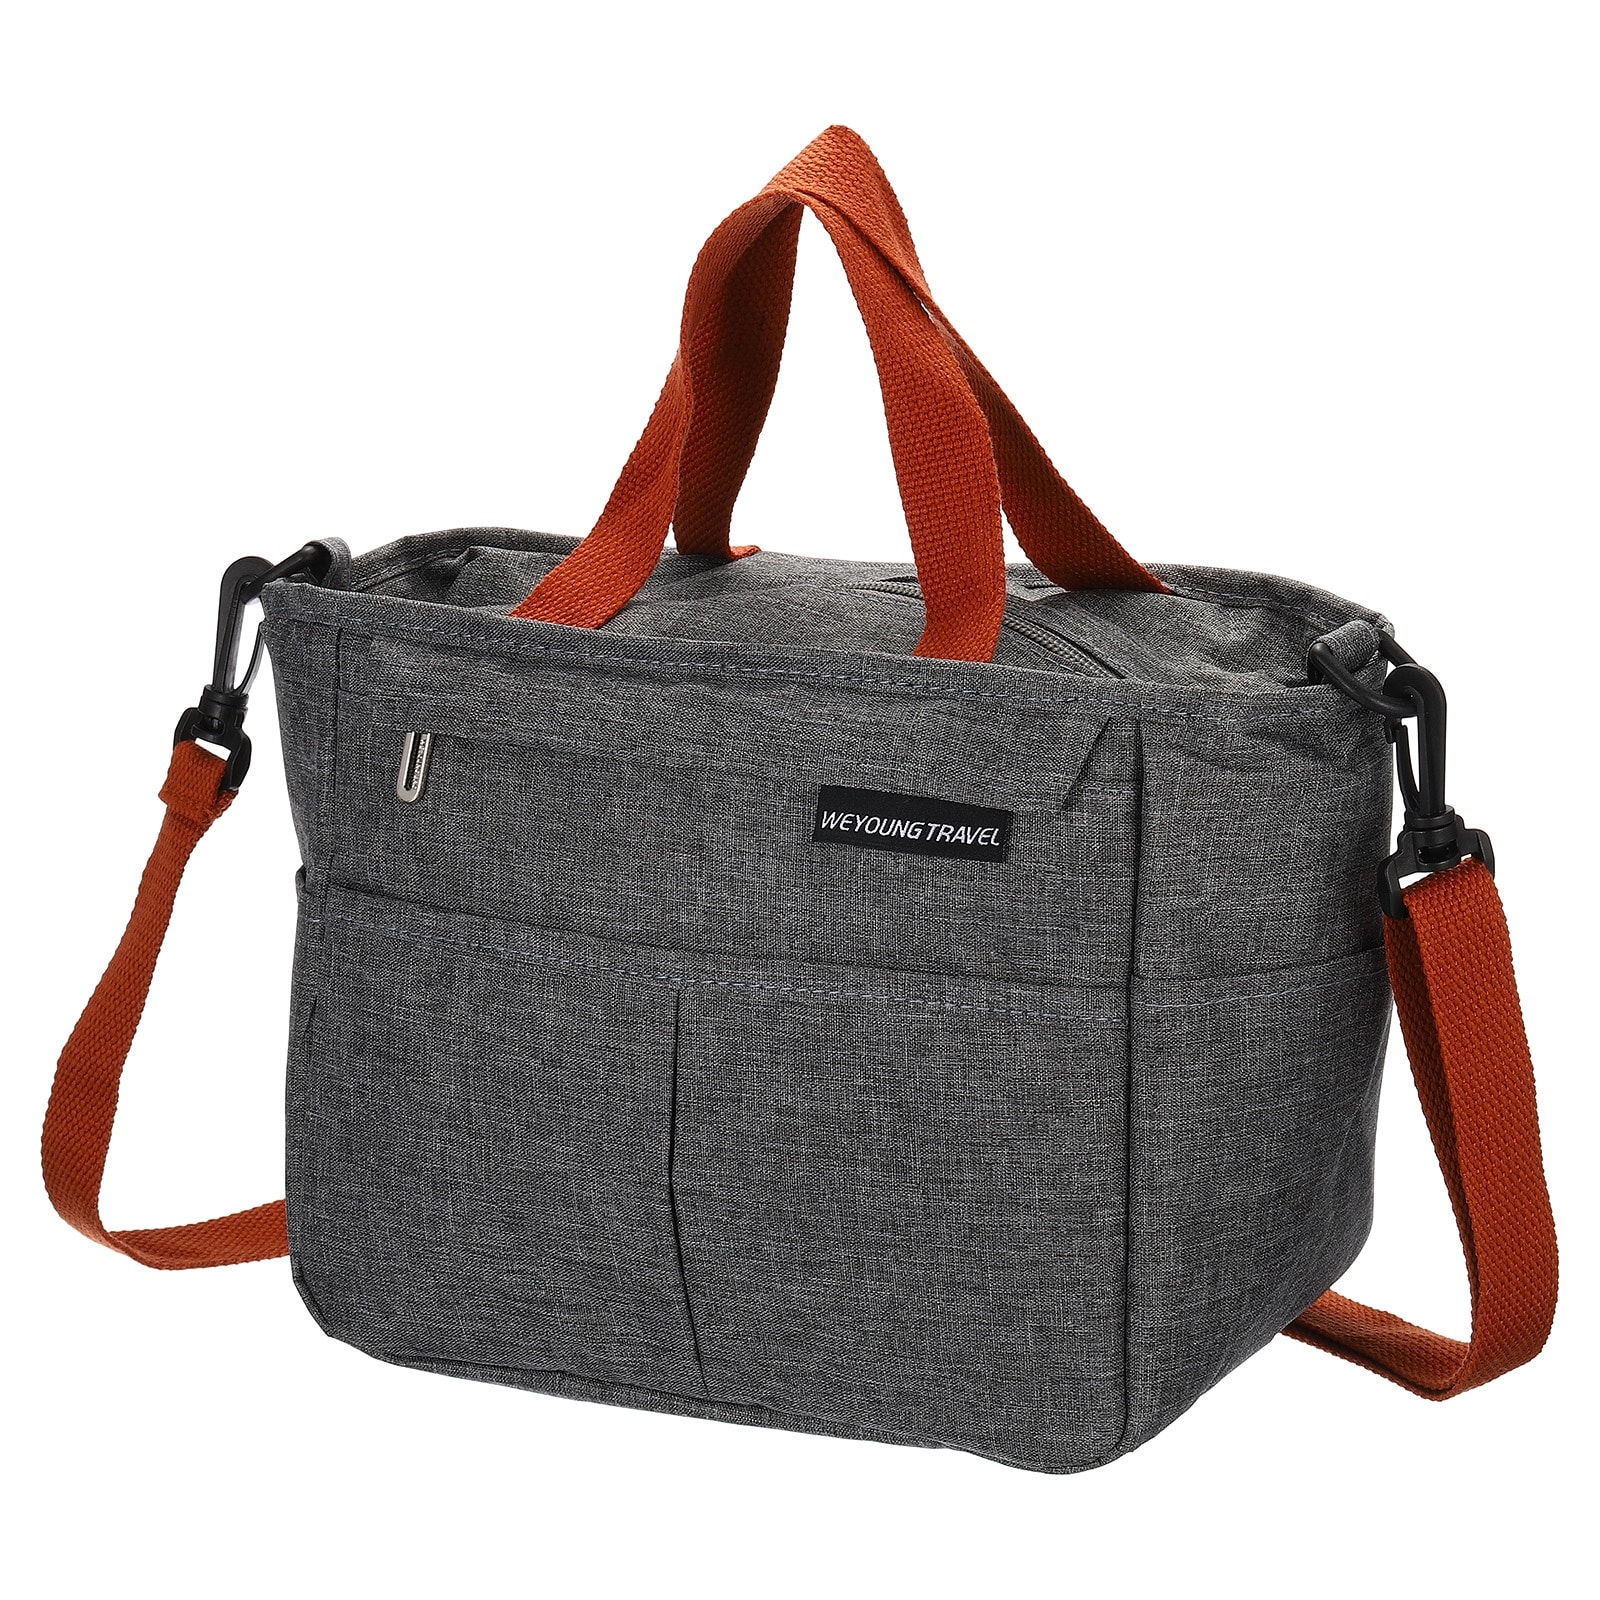 Lunch Box for Women/Men, Insulated Cooler Lunch Bag, 7.9x5.9x9.1 Inch